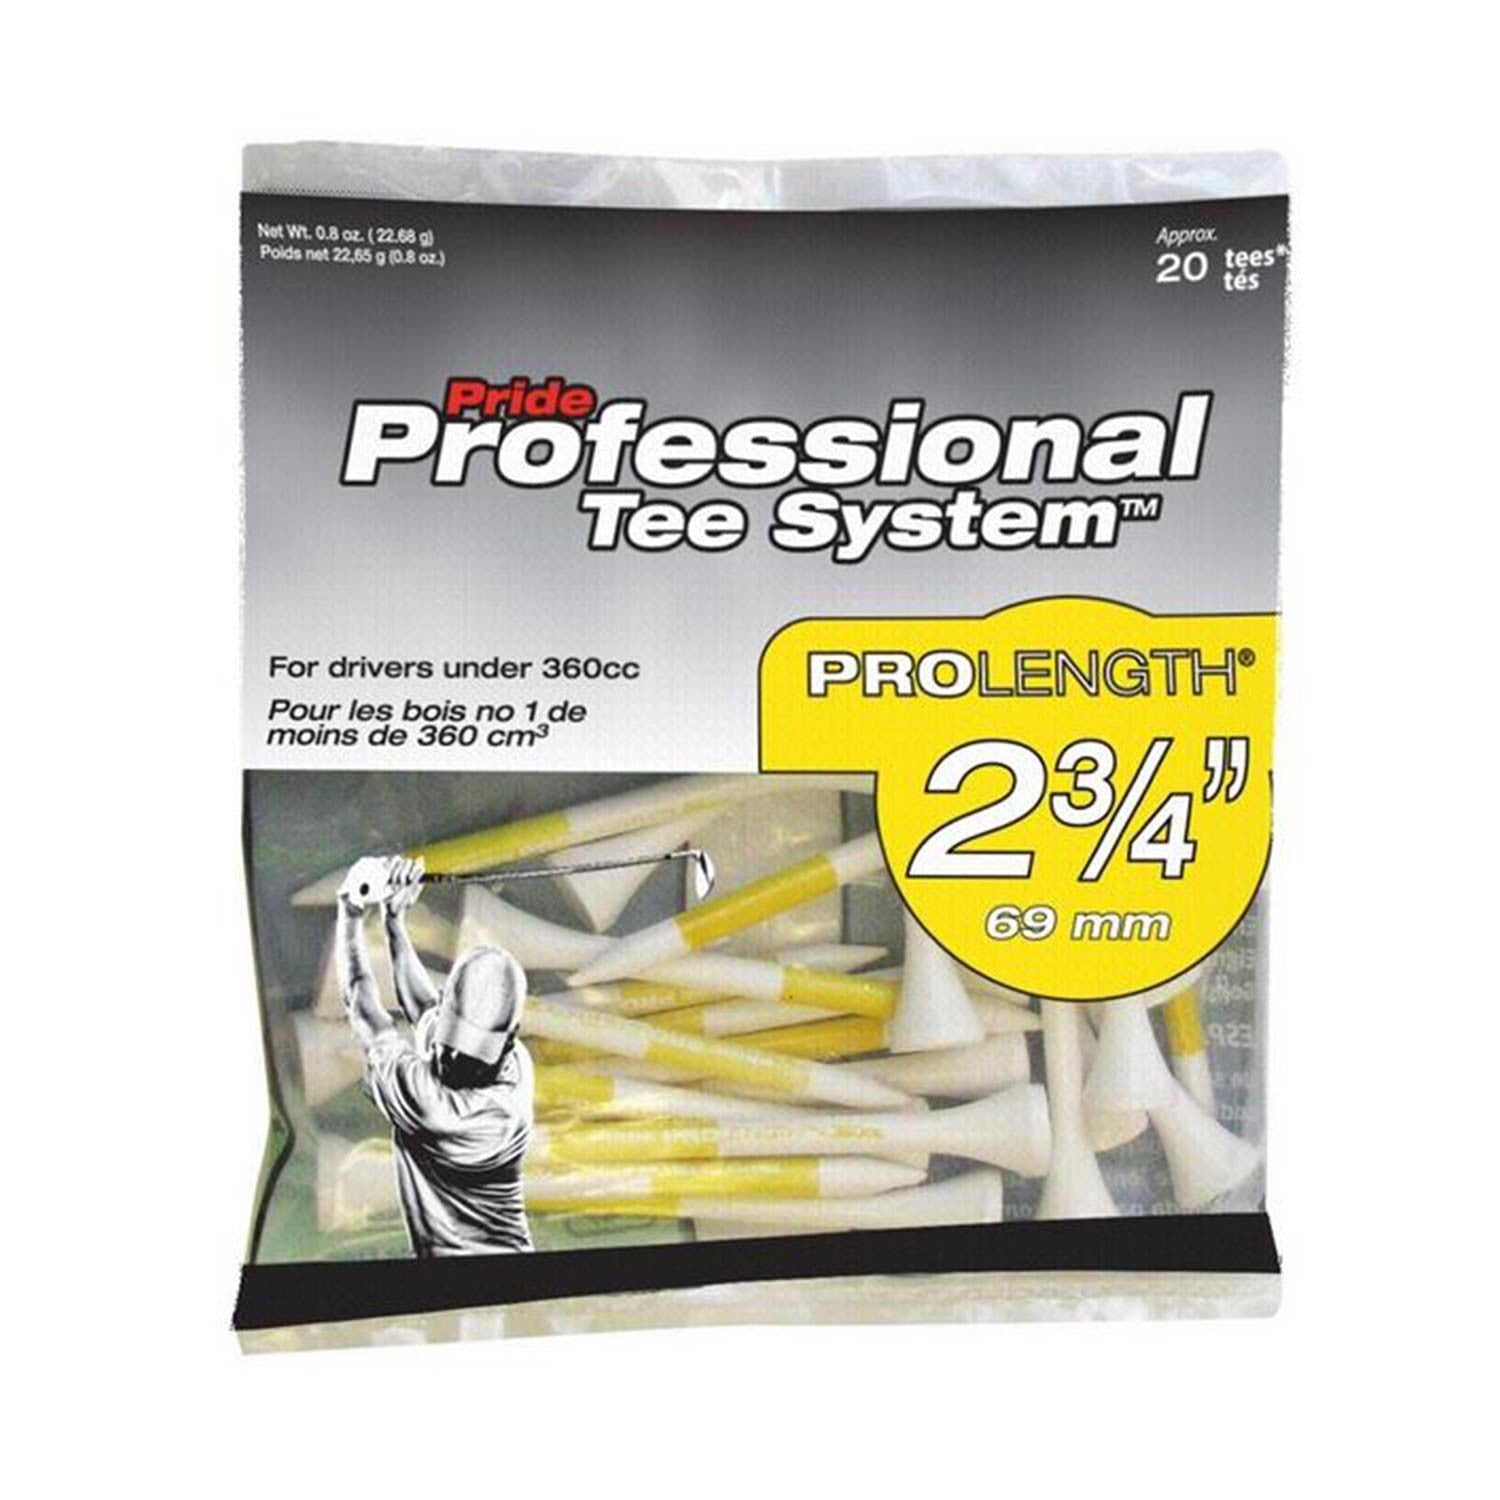 Pride Professional ProLength Wooden Tees - 20 pcs pack